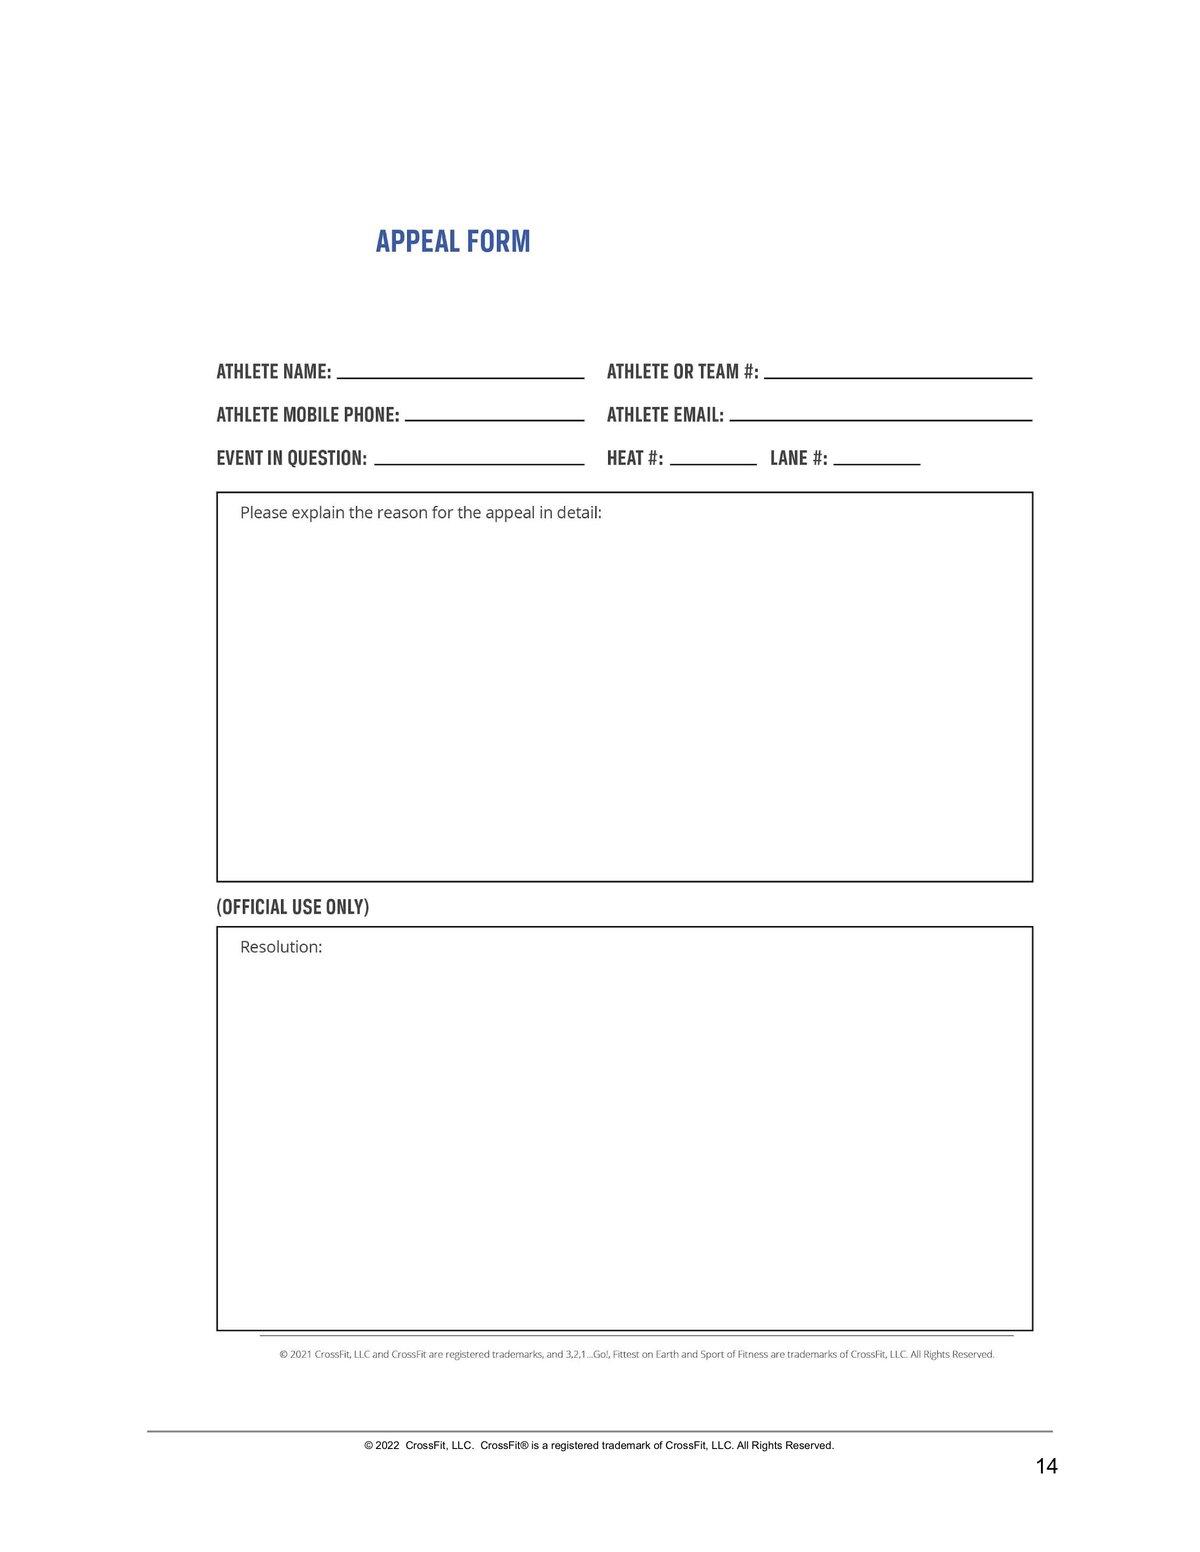 Appeal Form